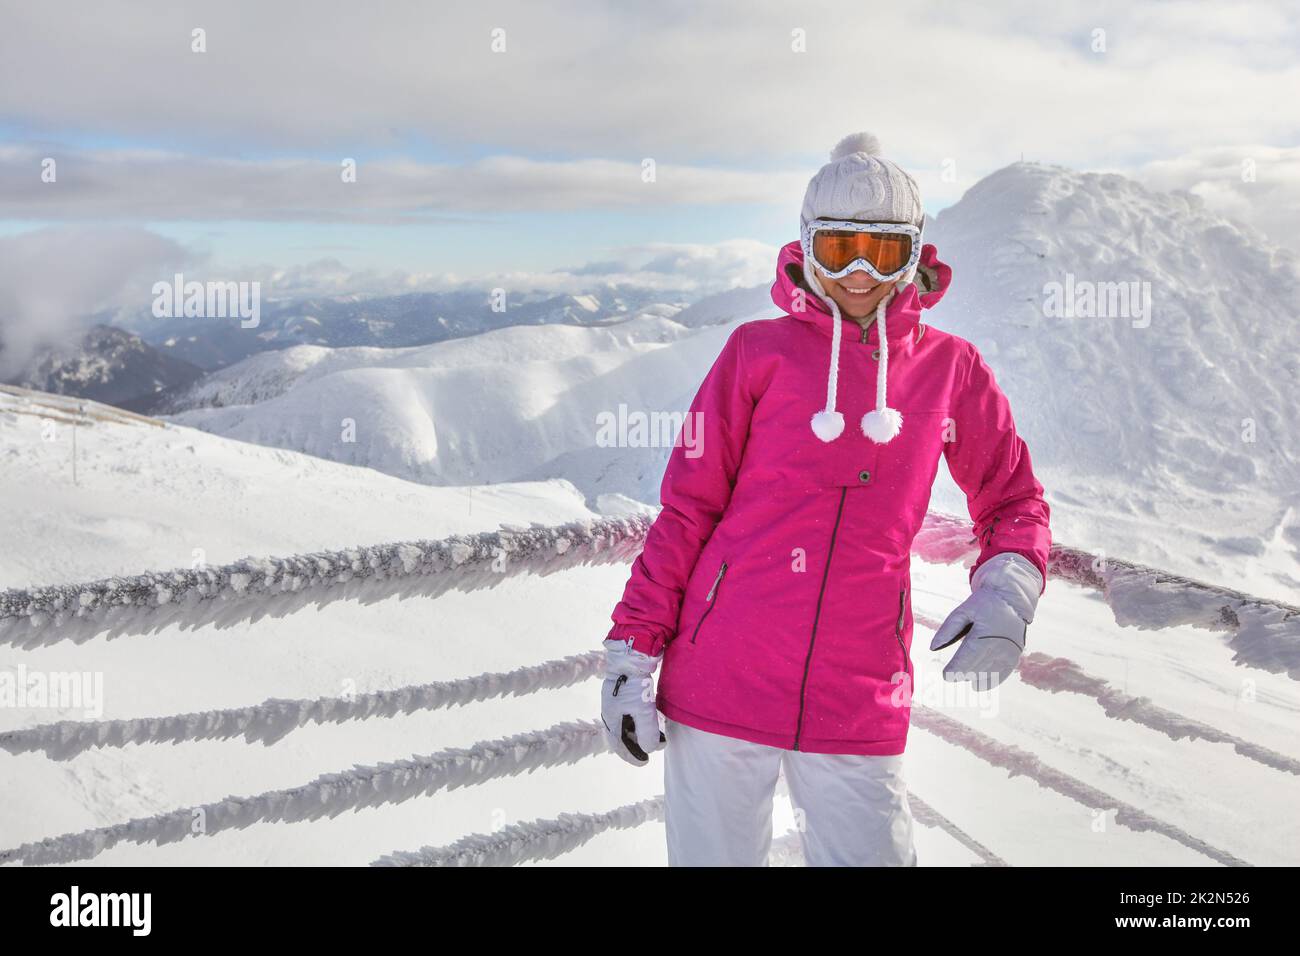 Young woman in pink jacket, wearing ski goggles, leaning on snow covered fence, smiling, white mountains in background. Stock Photo